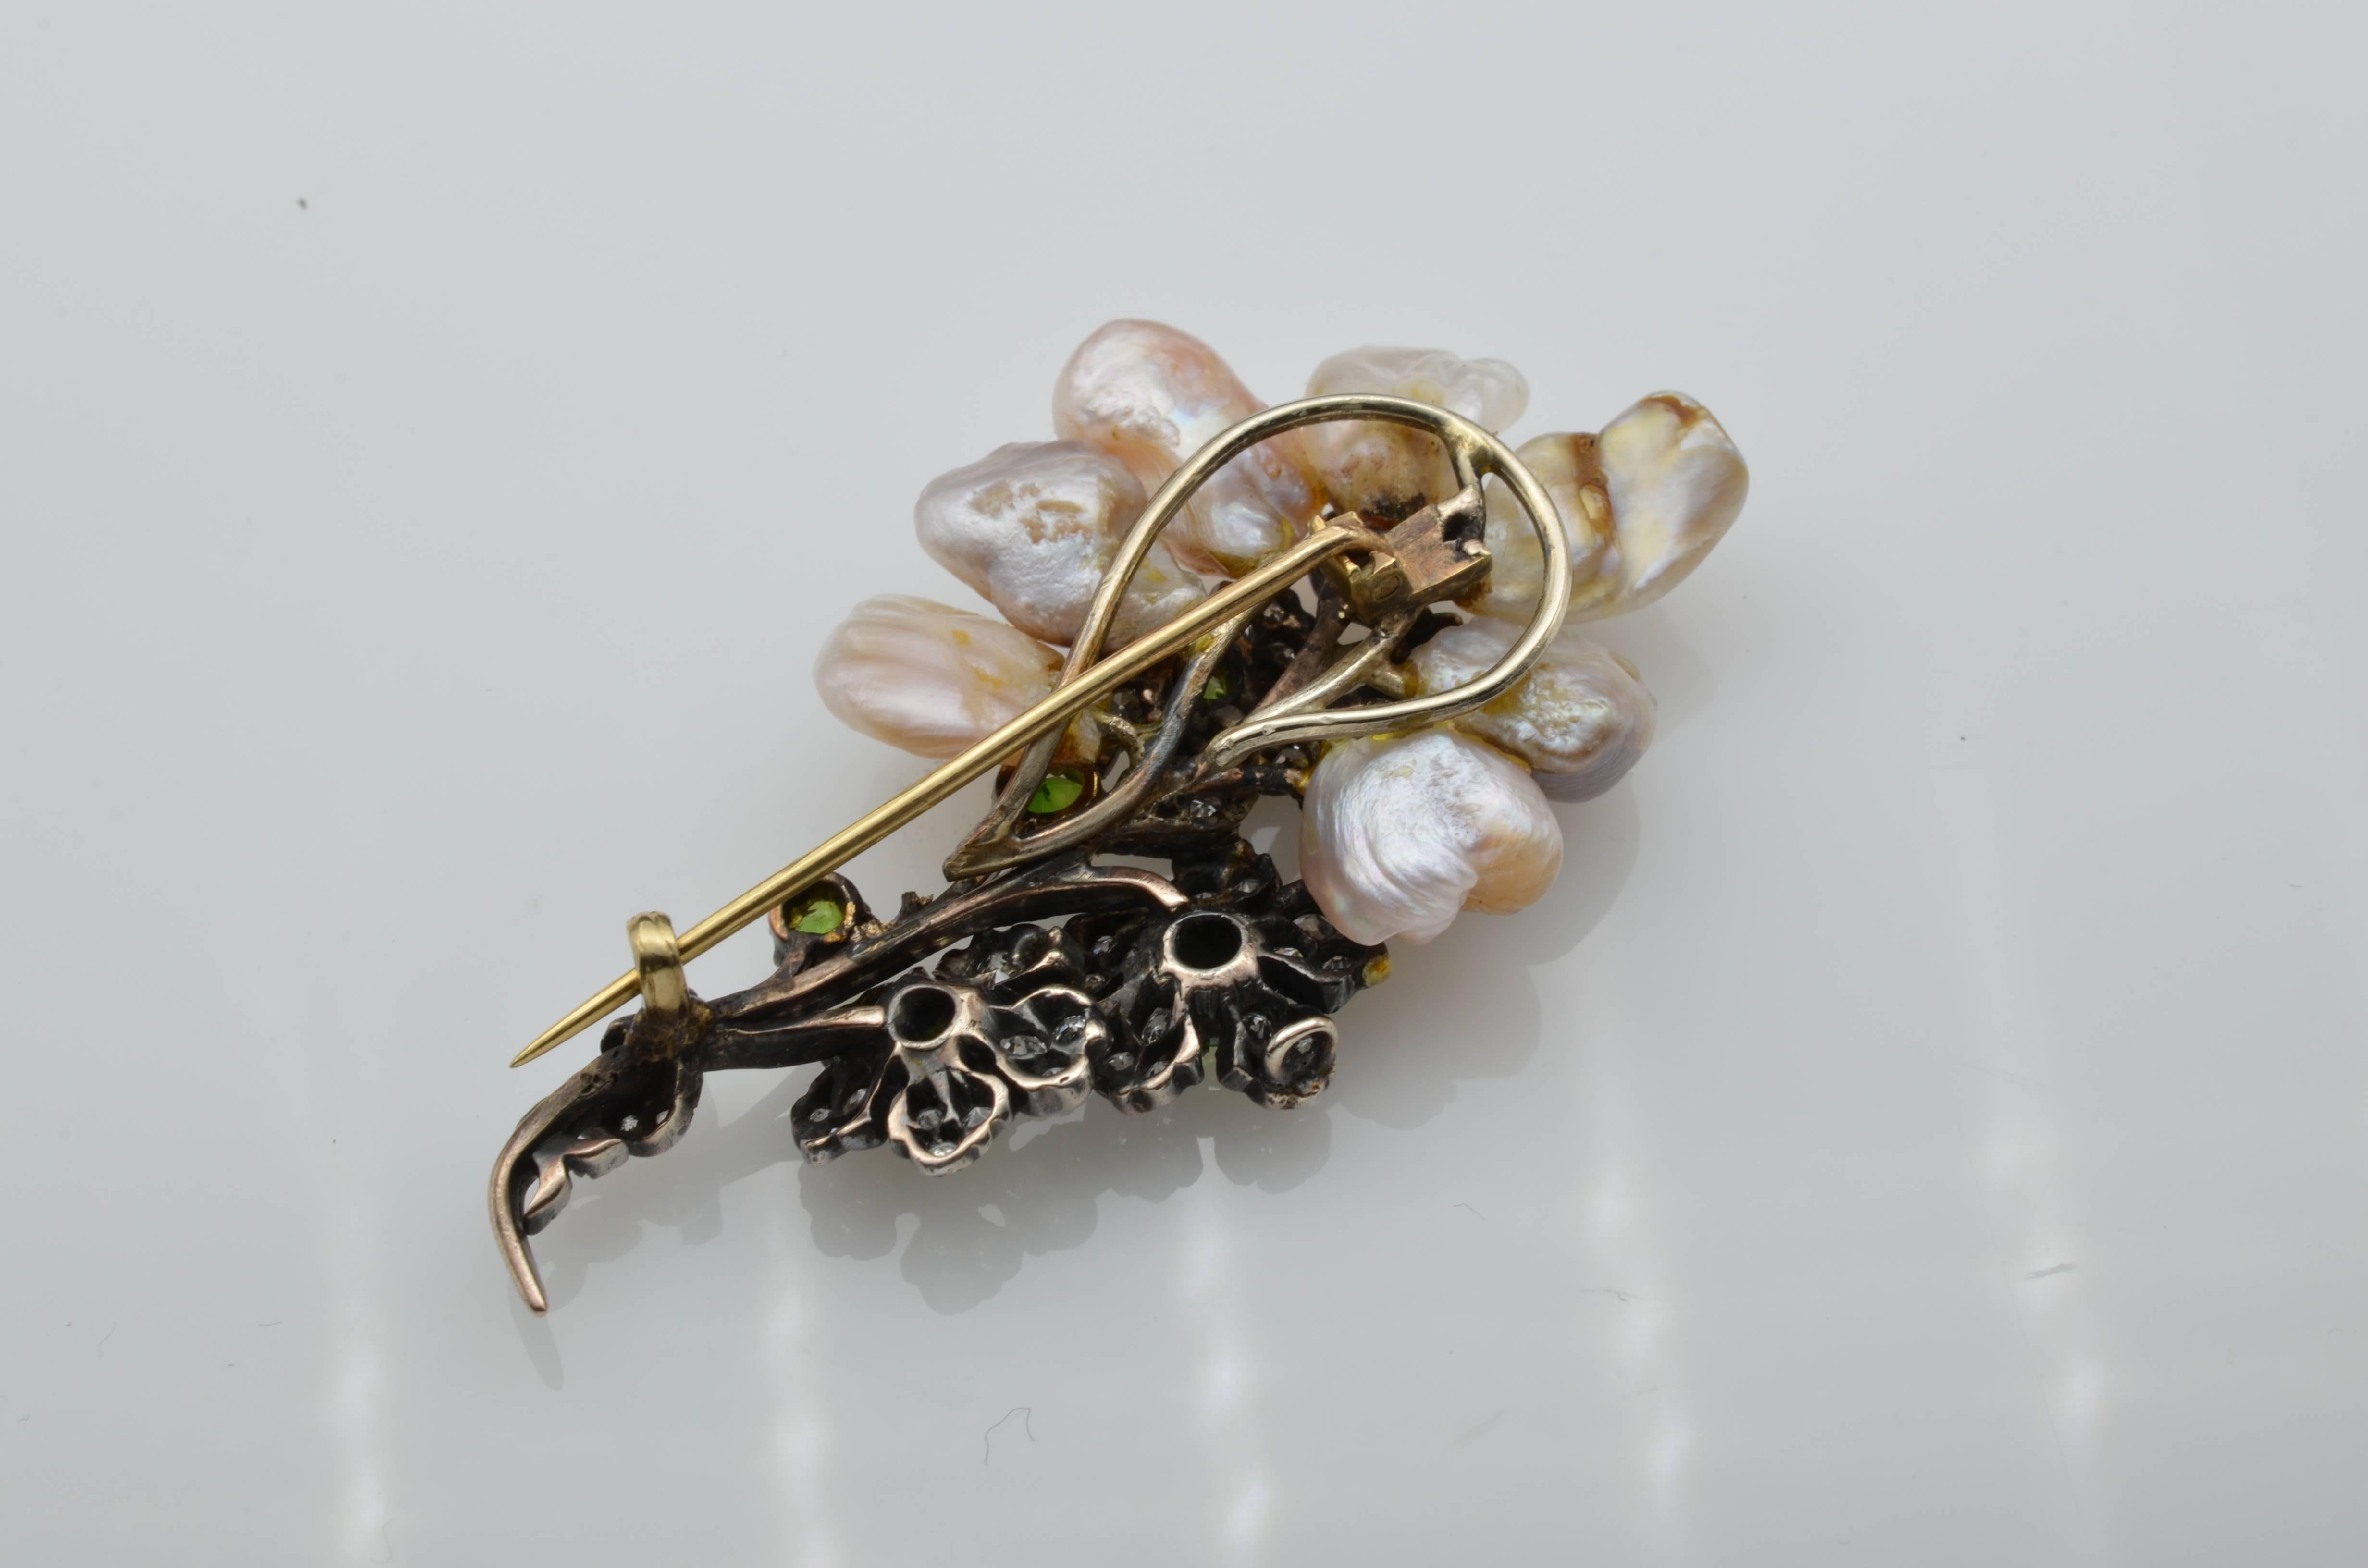 This antique turn of the century brooch is made with natural fresh water pearls in gorgeous colors of peaches, pinks, greys and whites. Green demantoid garnets and bright white diamonds decorate the beautiful blossom branch of the brooch. The